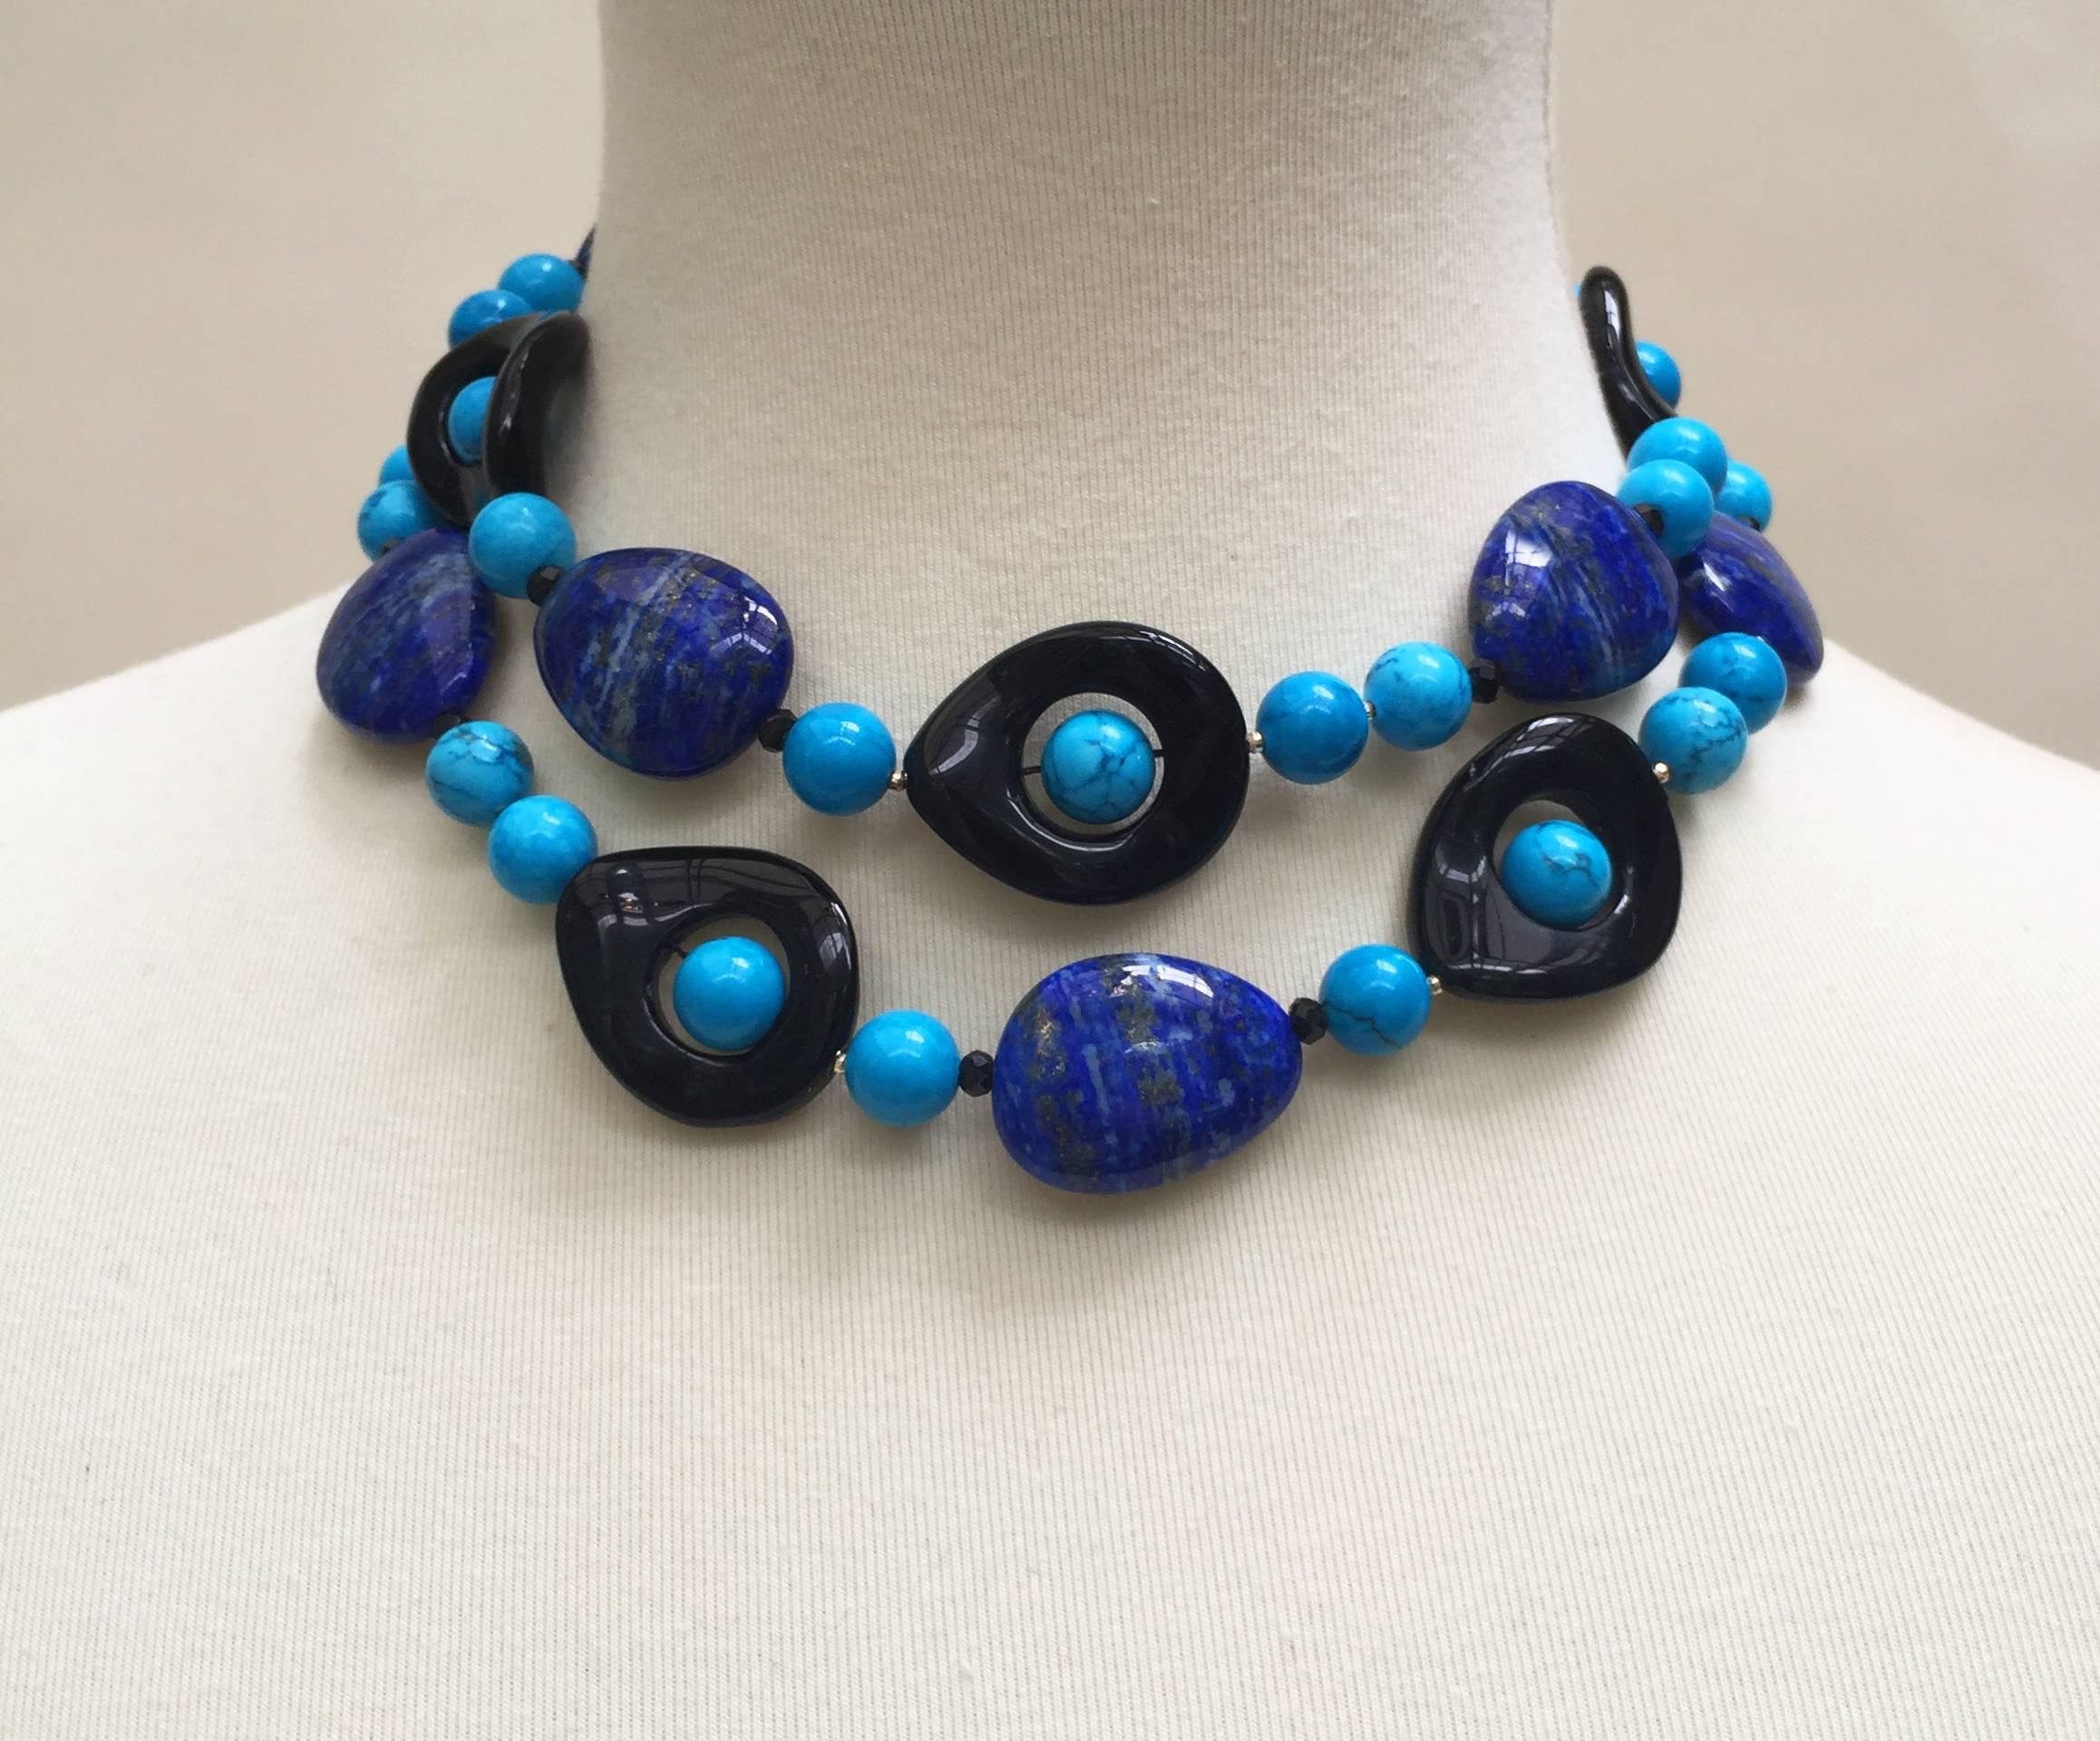 Marina J. has composed turquoise, lapis lazuli, and onyx beads together in a 33 inch necklace with a 14 k yellow gold clasp. In between the larger beads are small faceted  14 k yellow gold and black spinel beads, adding a shine to the necklace. The